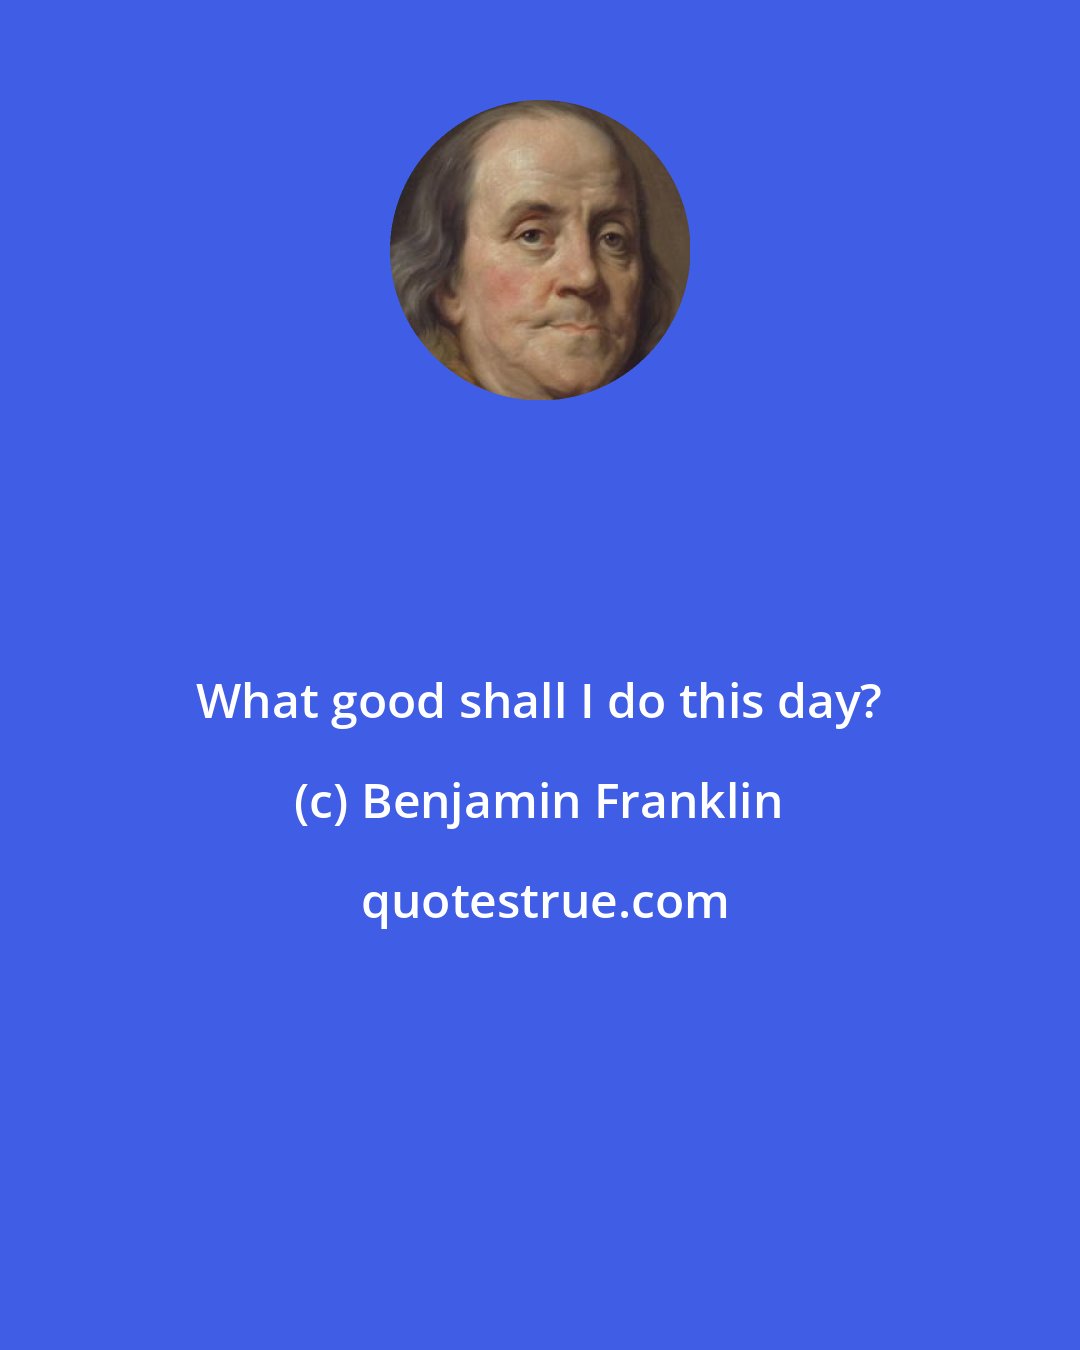 Benjamin Franklin: What good shall I do this day?